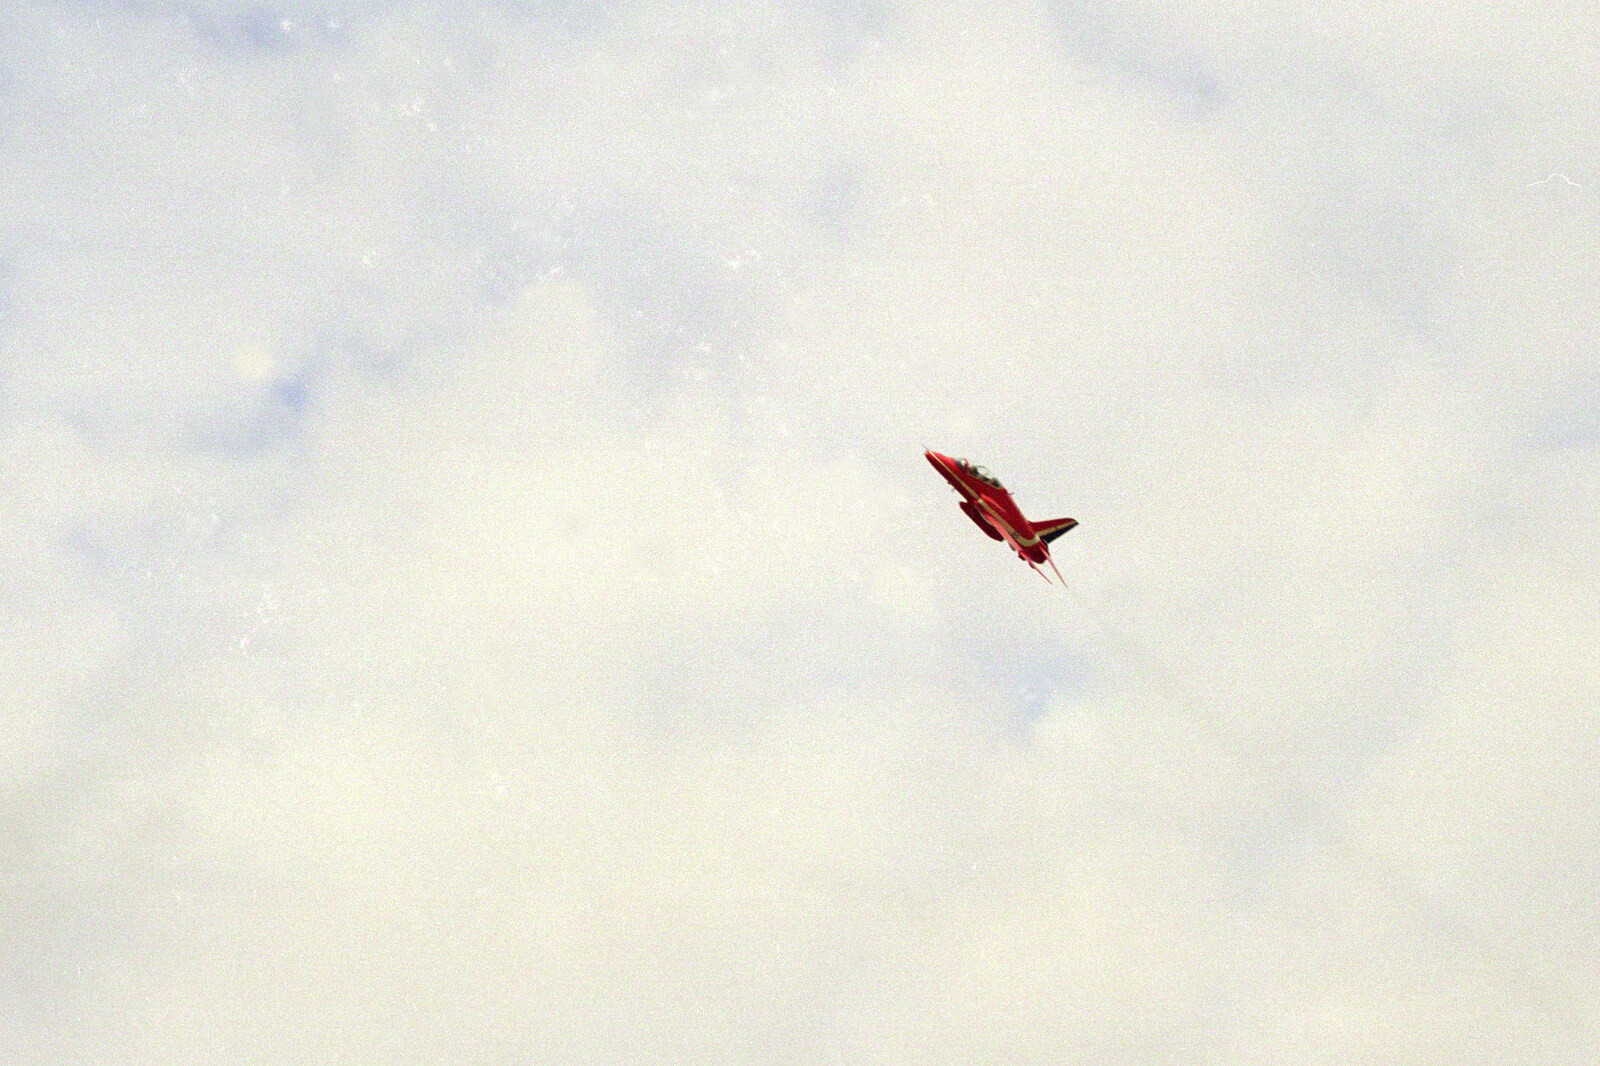 One of the Synchro-pair Red Arrows from Tony and Janet's Building Plot, and the Red Arrows, Eye, Suffolk - 22nd July 1998